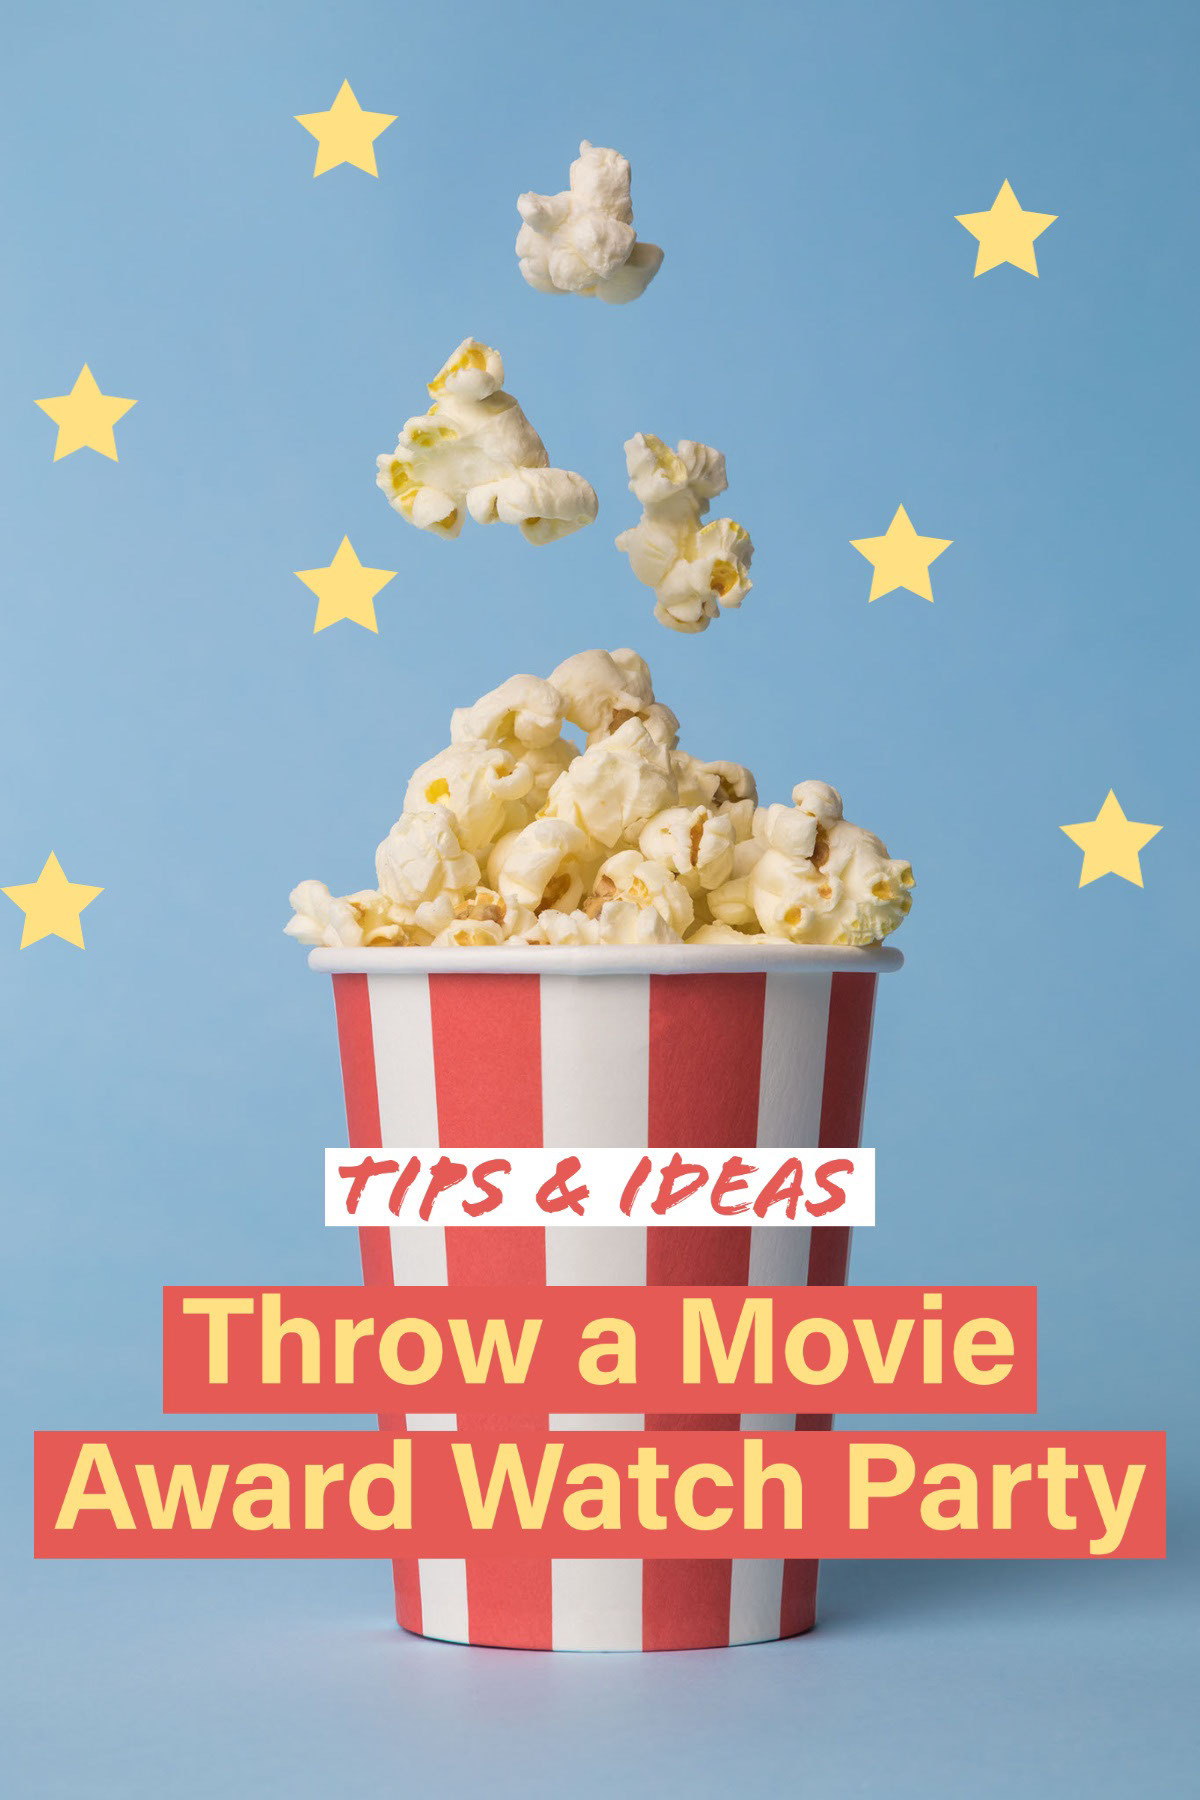 Blue & Yellow Movie Award Party Pinterest Post Throw a Movie Award Watch Party Tips & Ideas